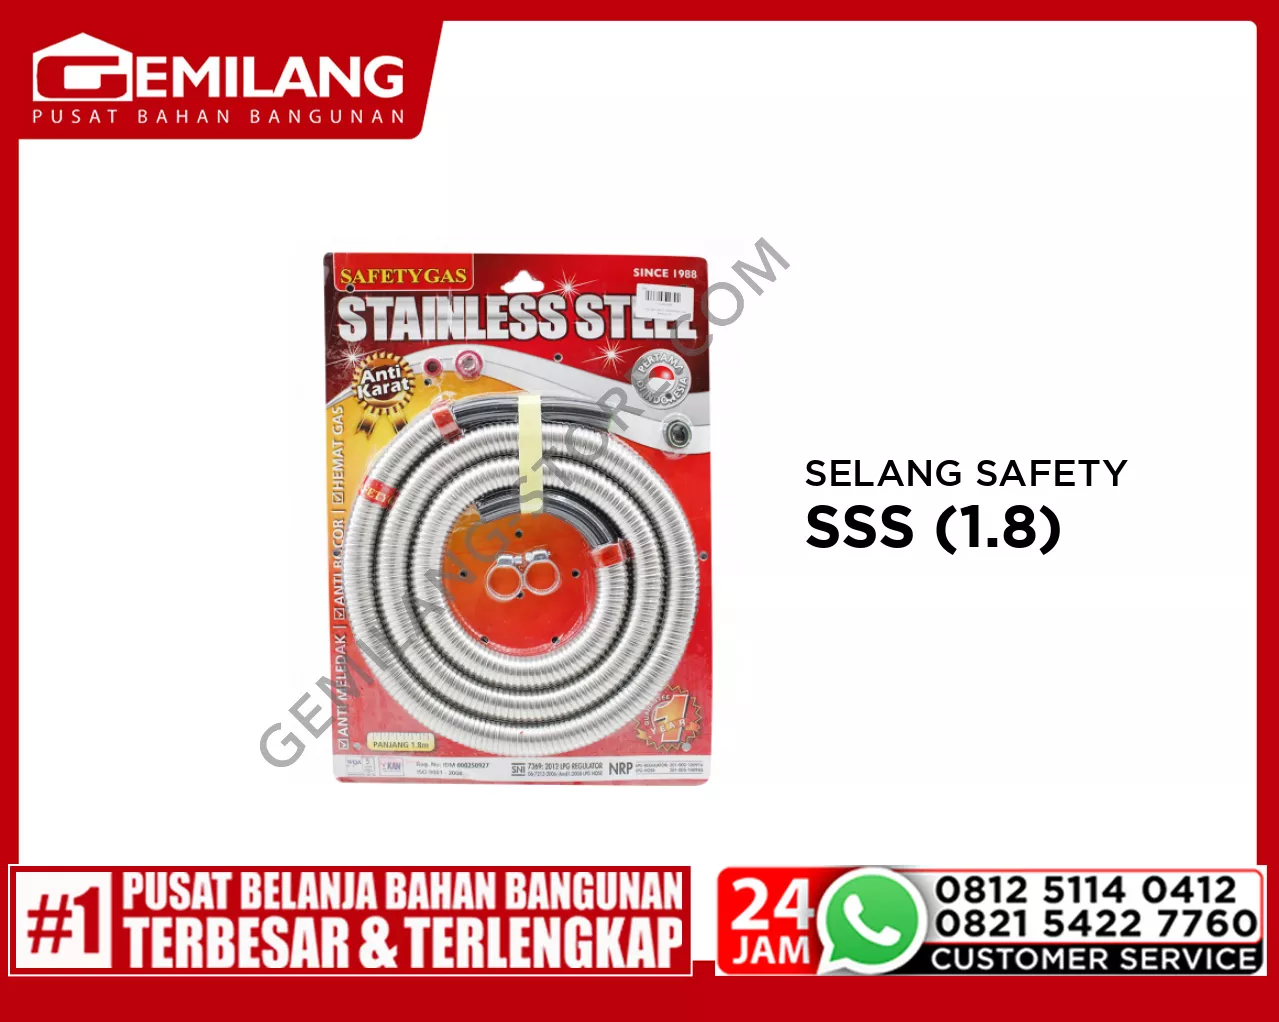 IL SELANG SAFETY STAINLESS 106 SMSS (1.8)